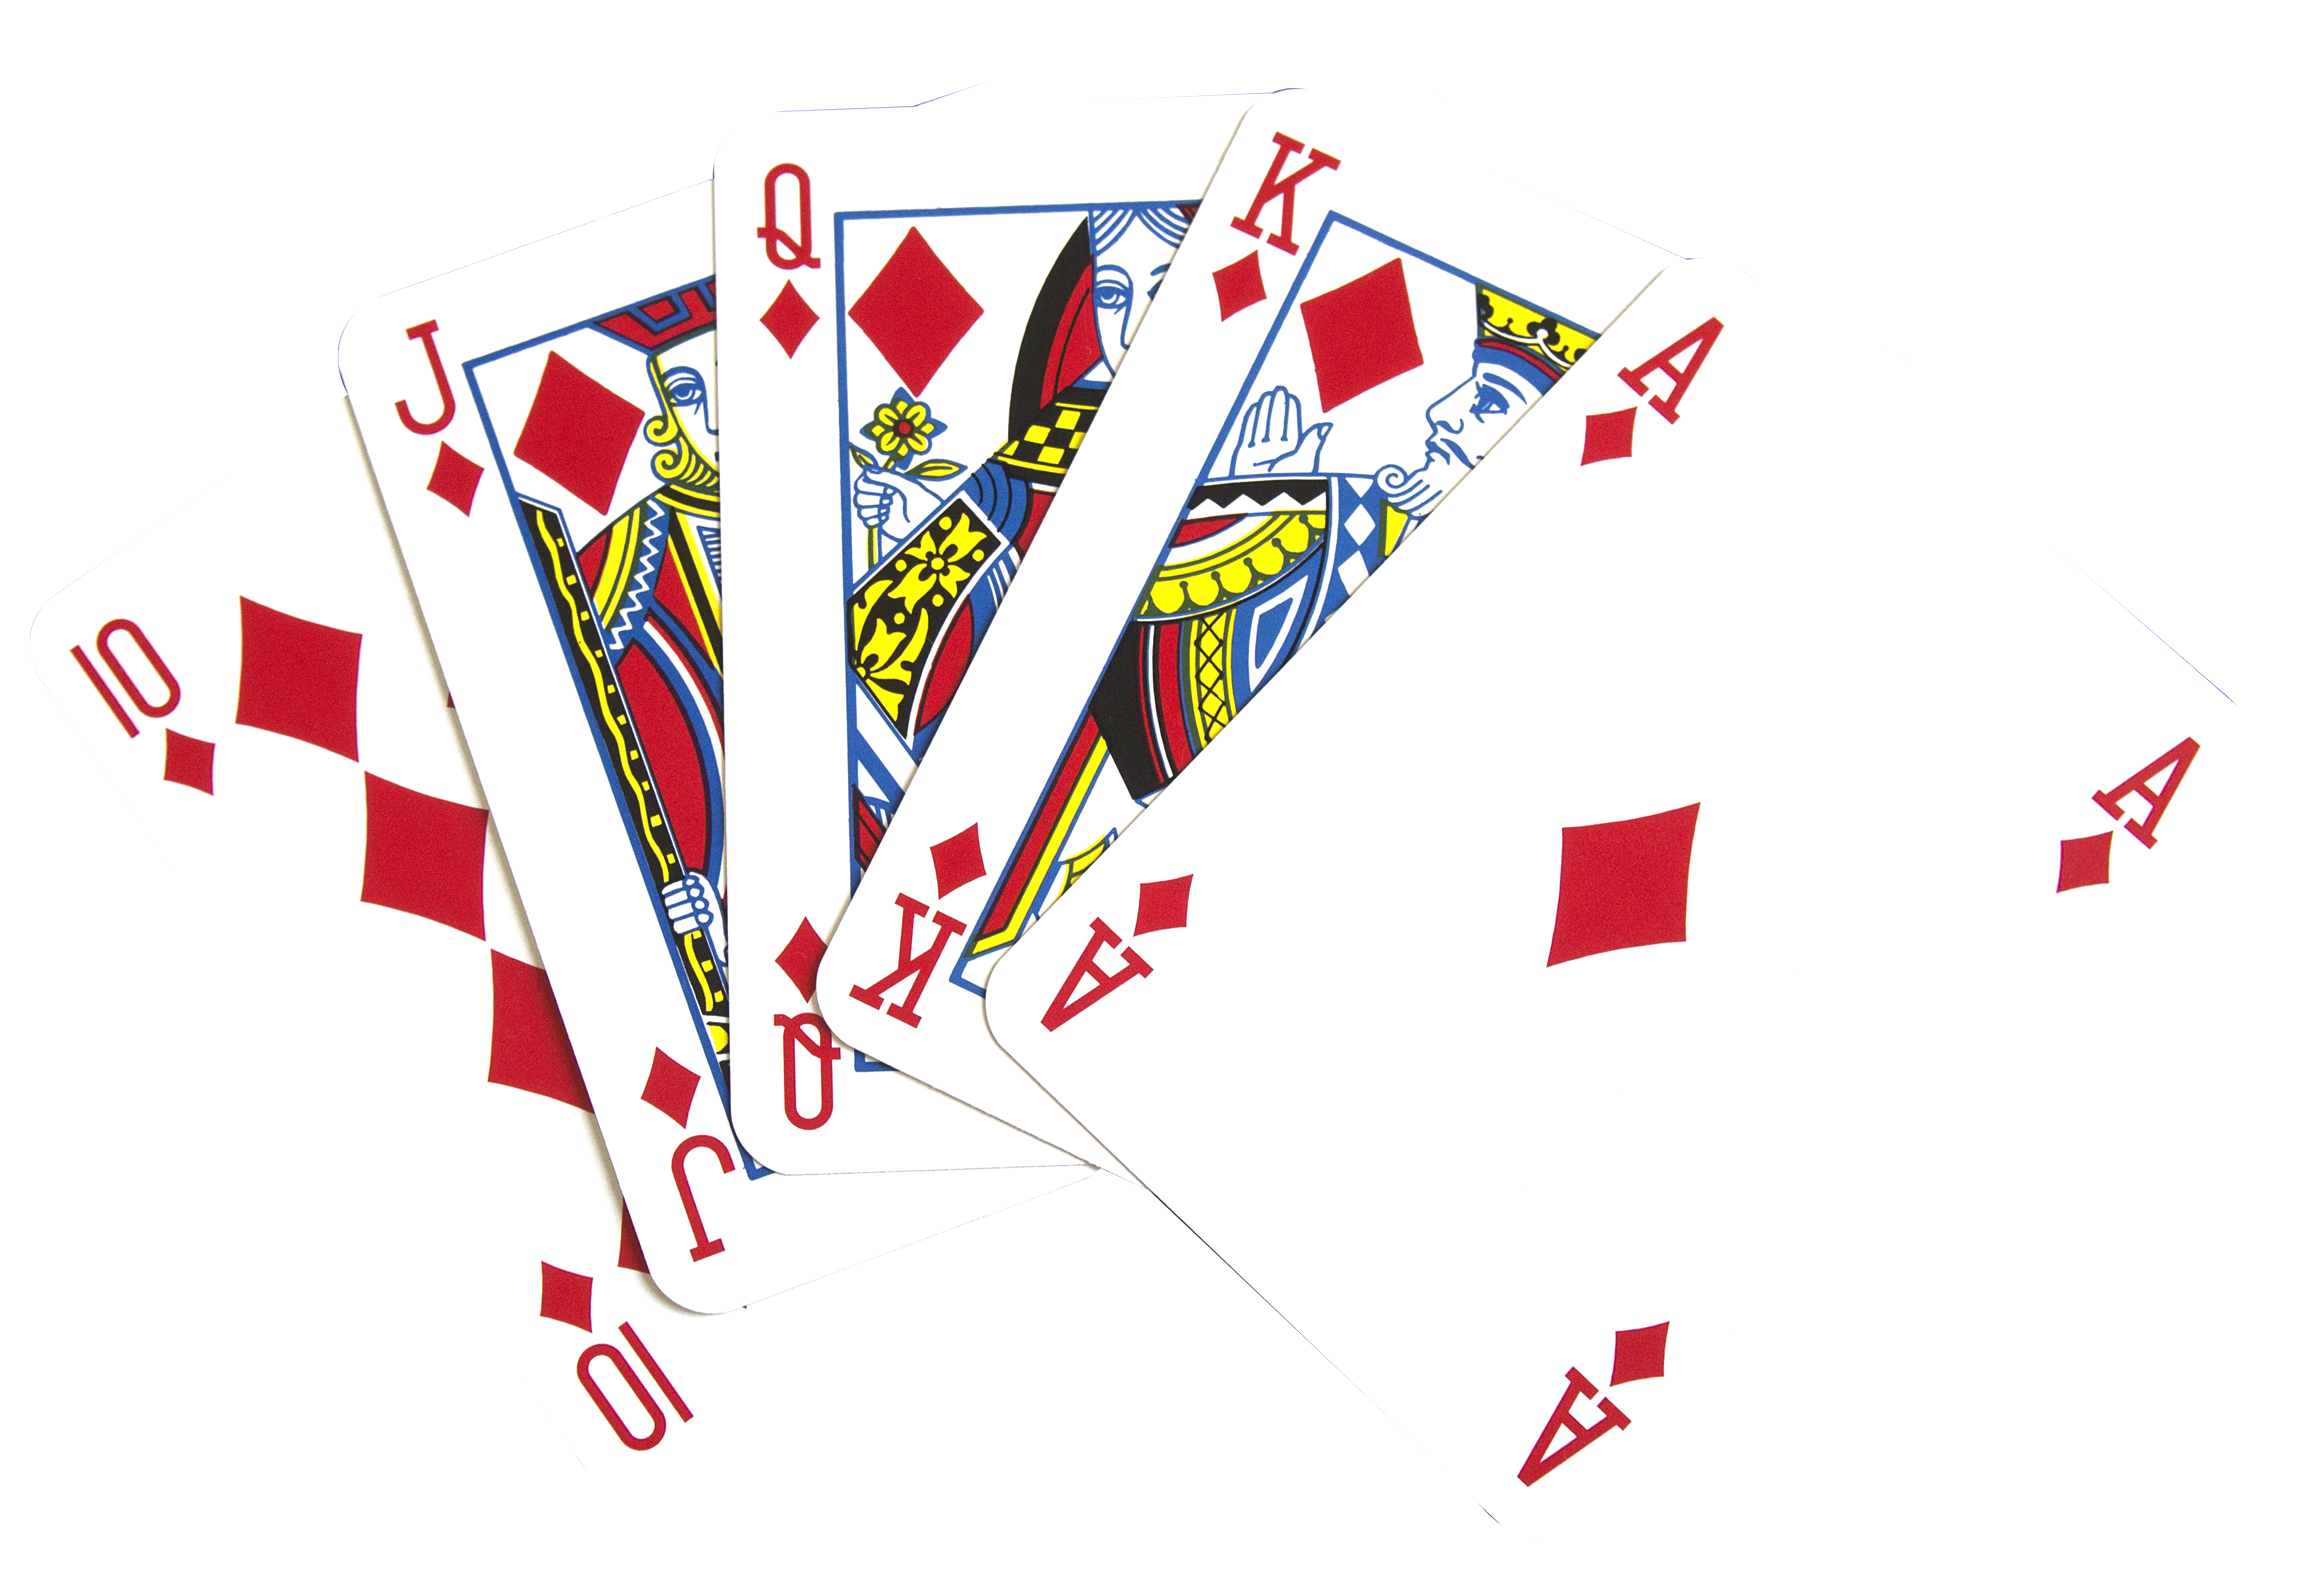 Playing Card Images Download